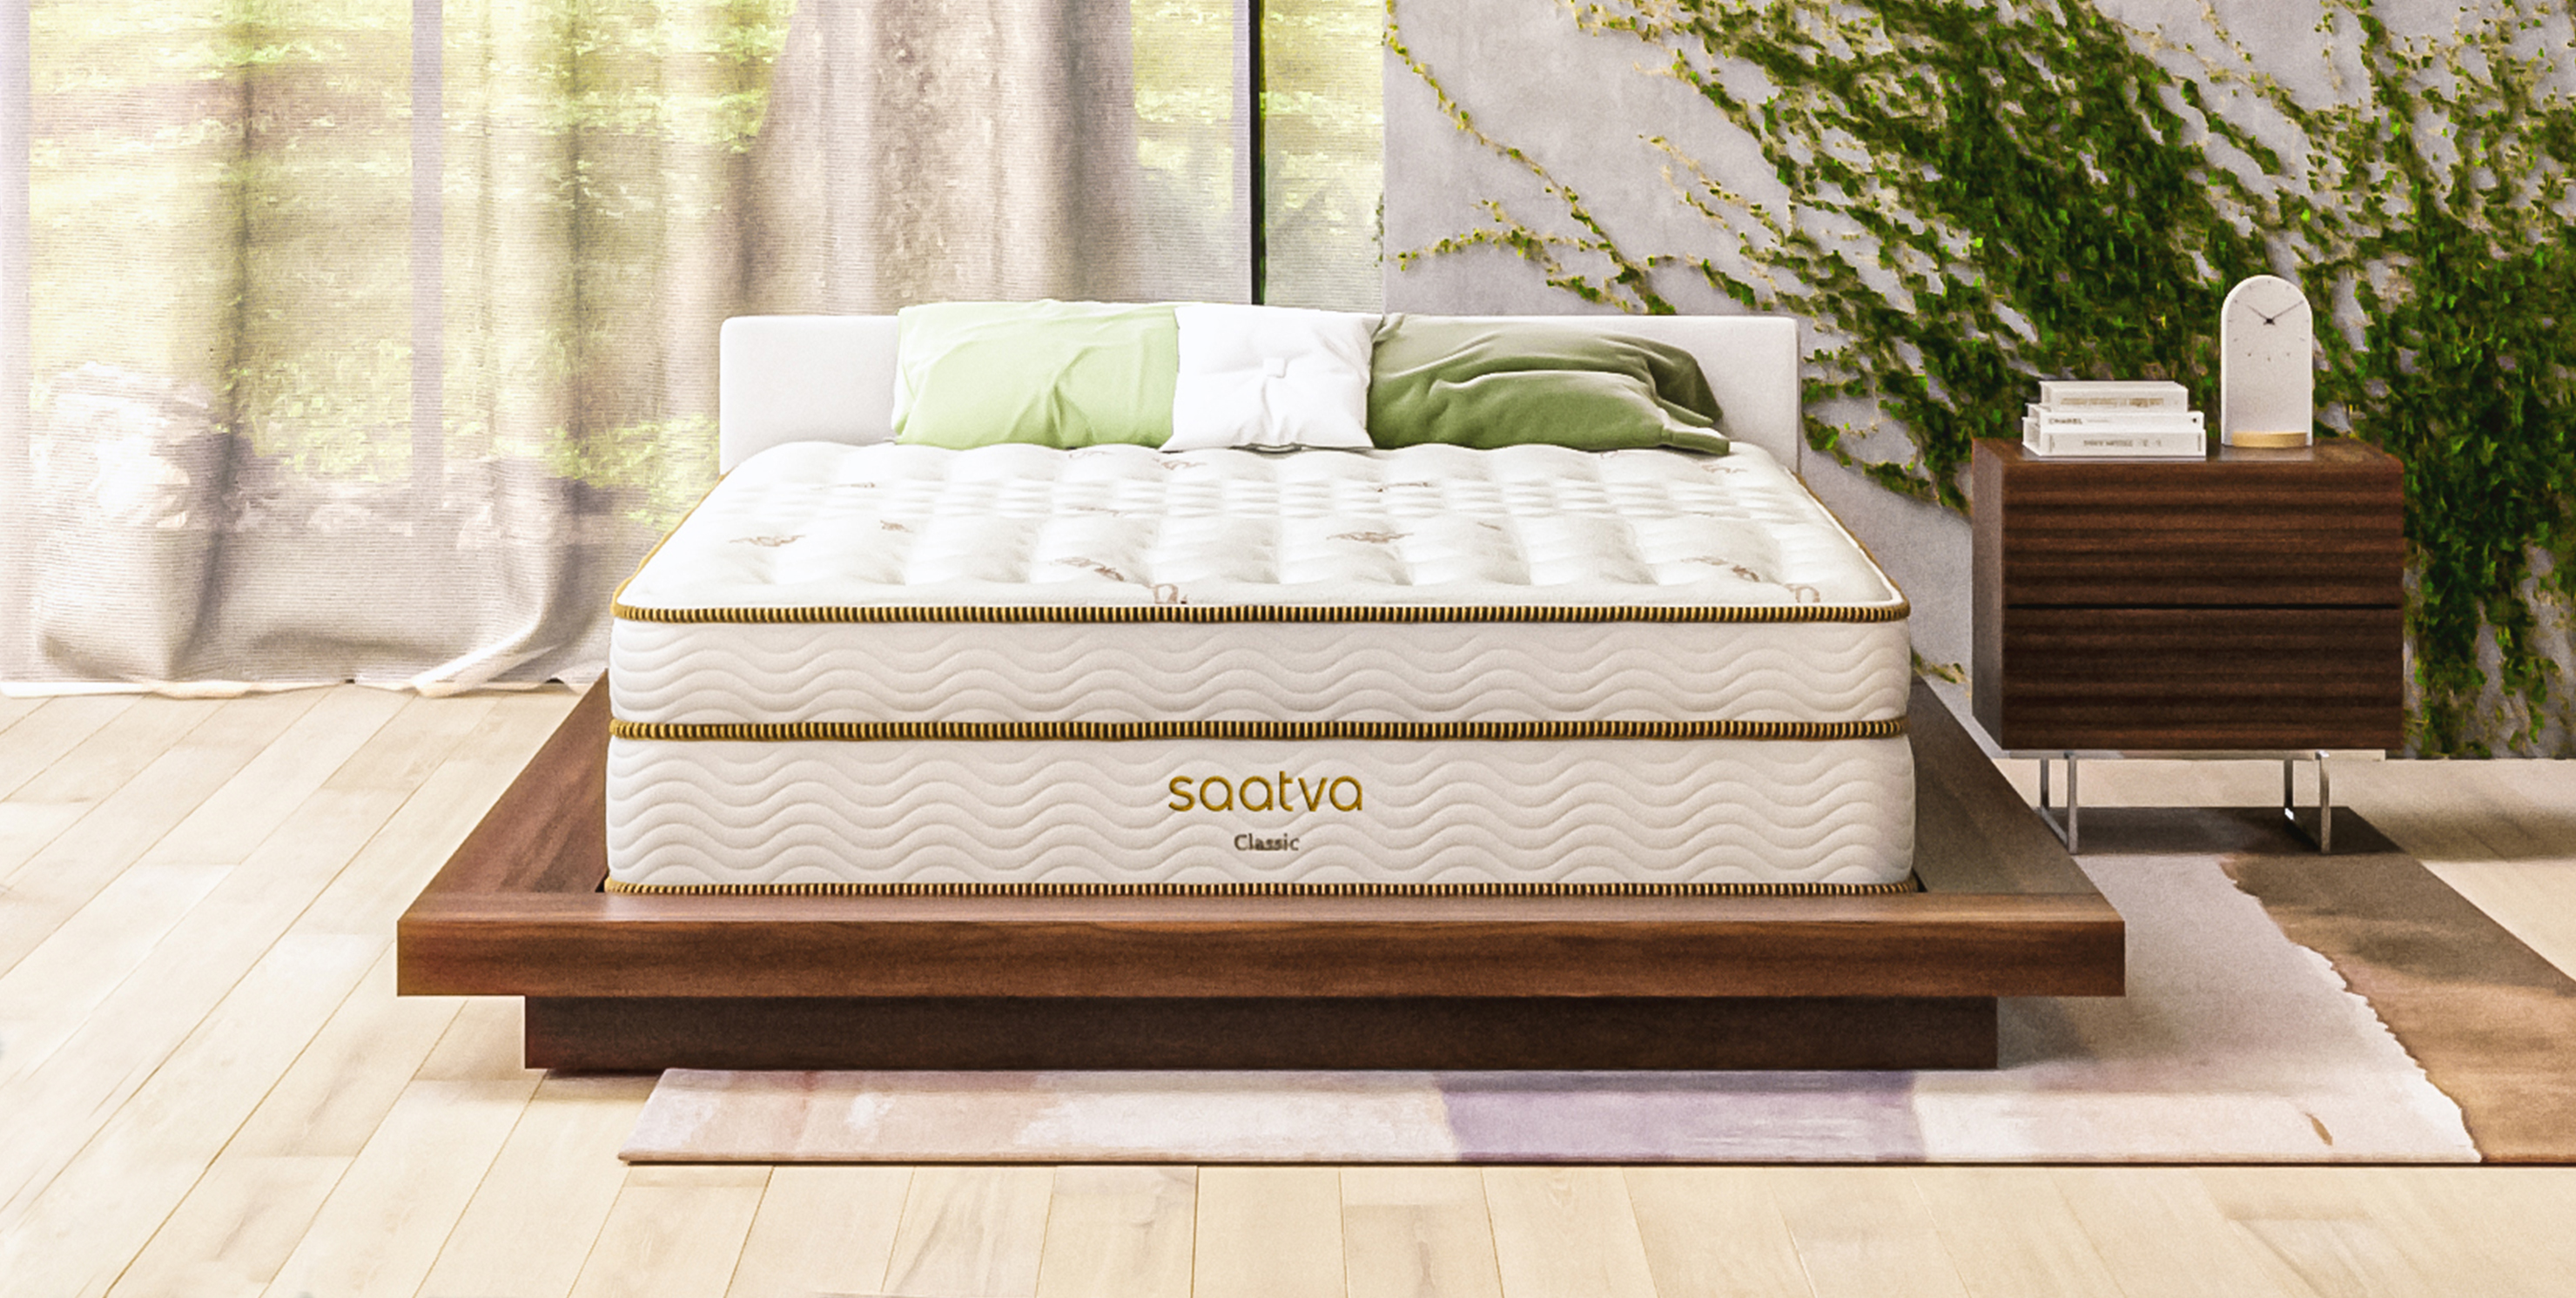 Saatva Classic Mattress, the best pillow-top mattress for all sleepers, shown on a wooden bedframe next to a lush green wall plant